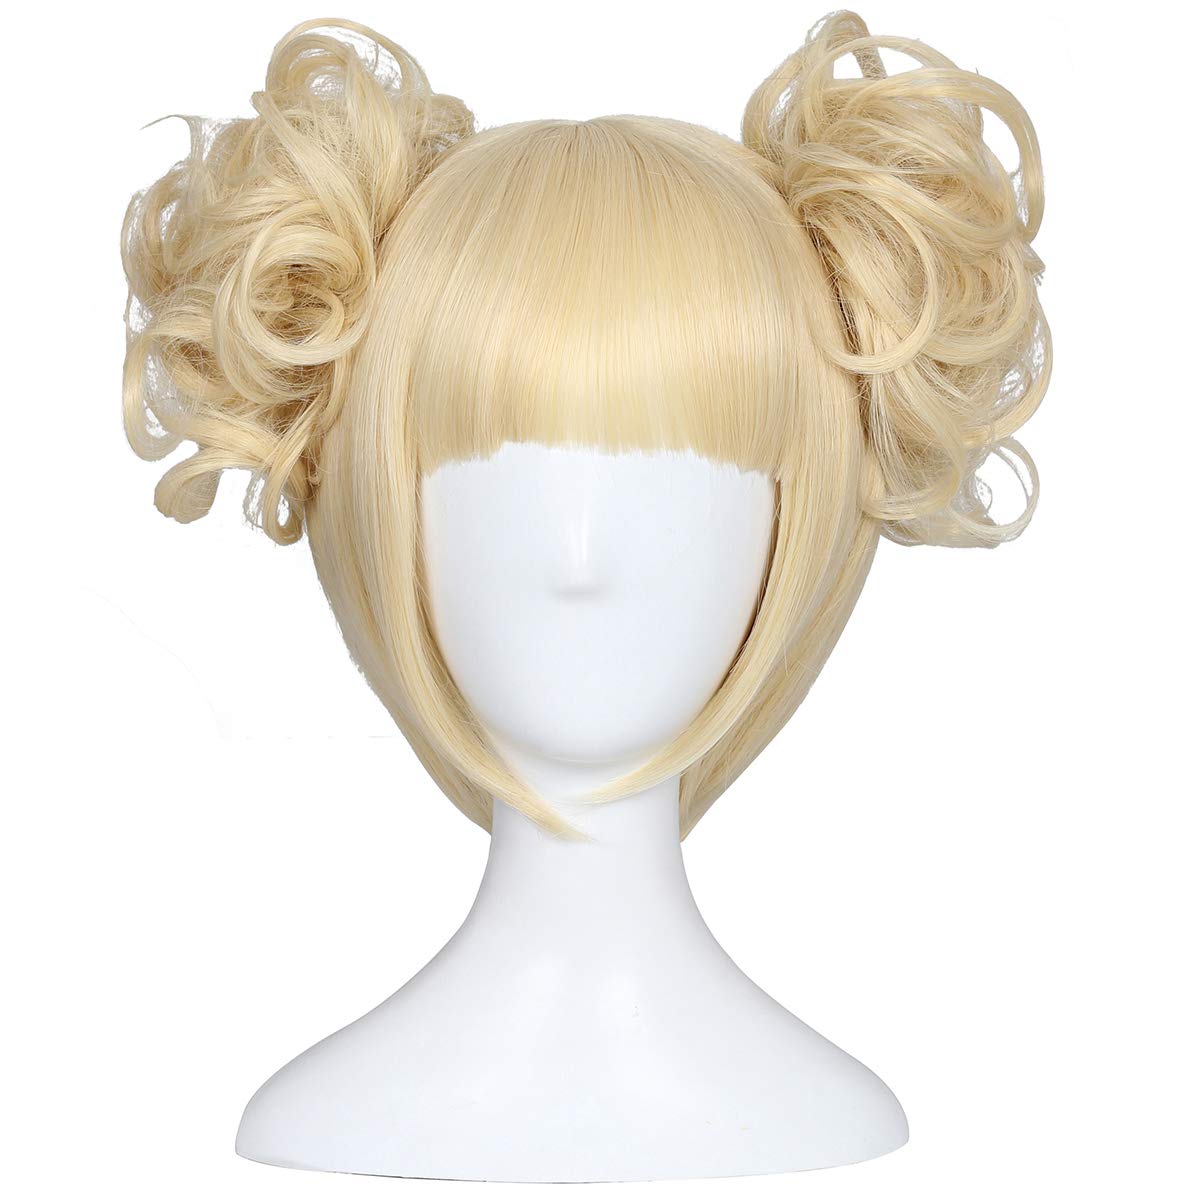 Price:$19.99    ColorGround Blonde Cosplay Wig and 2 Detachable Buns with Clips  Beauty